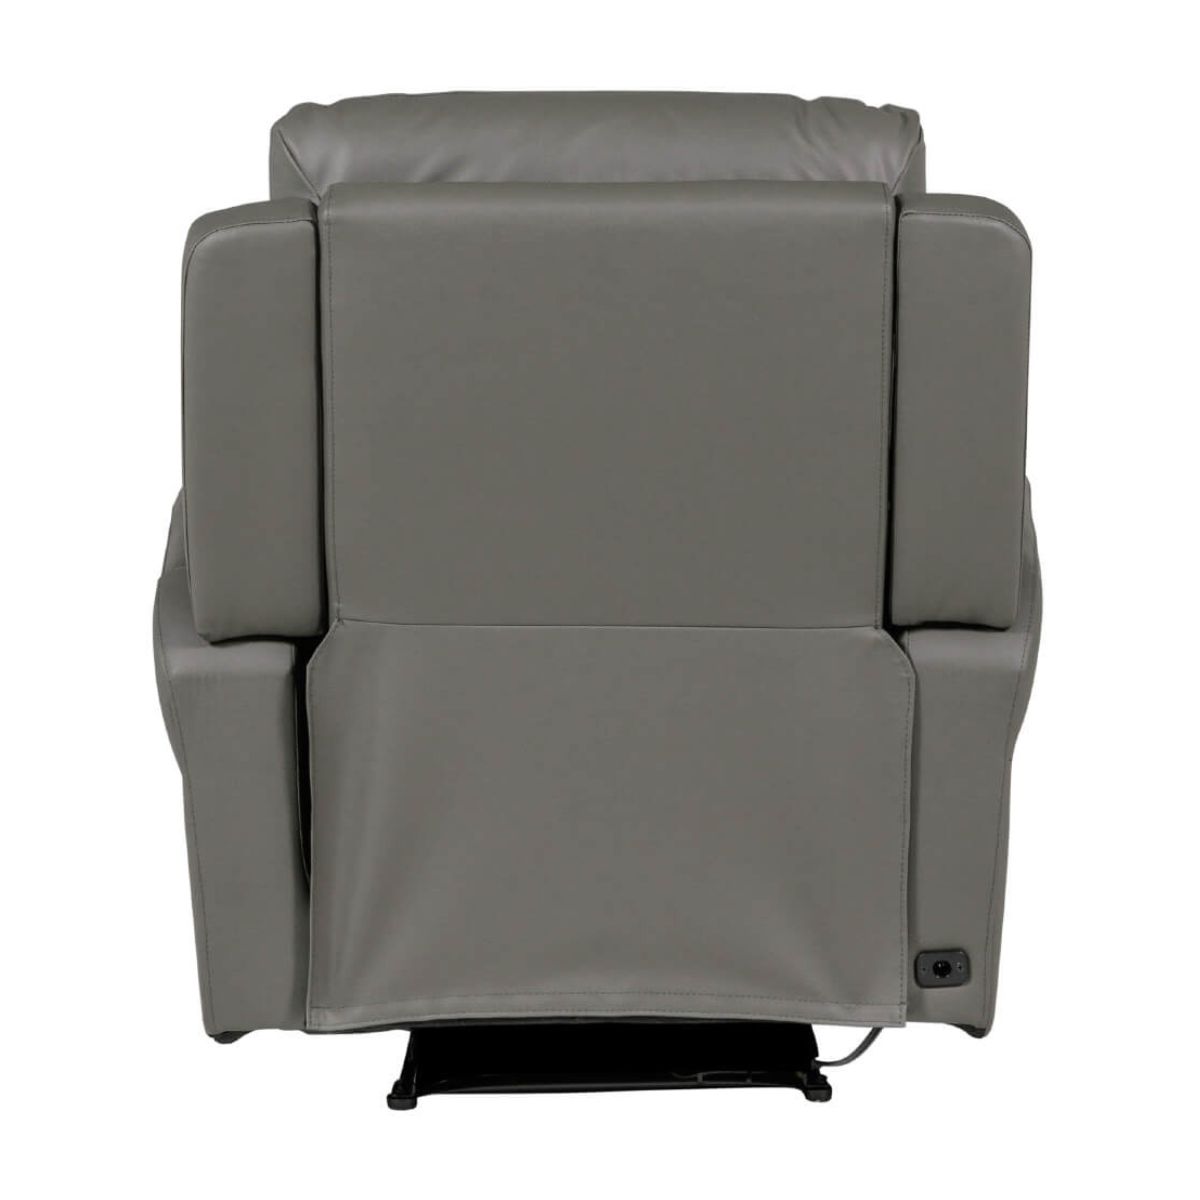 Rosslare Leather Electric Recliner Armchair Grey - 5